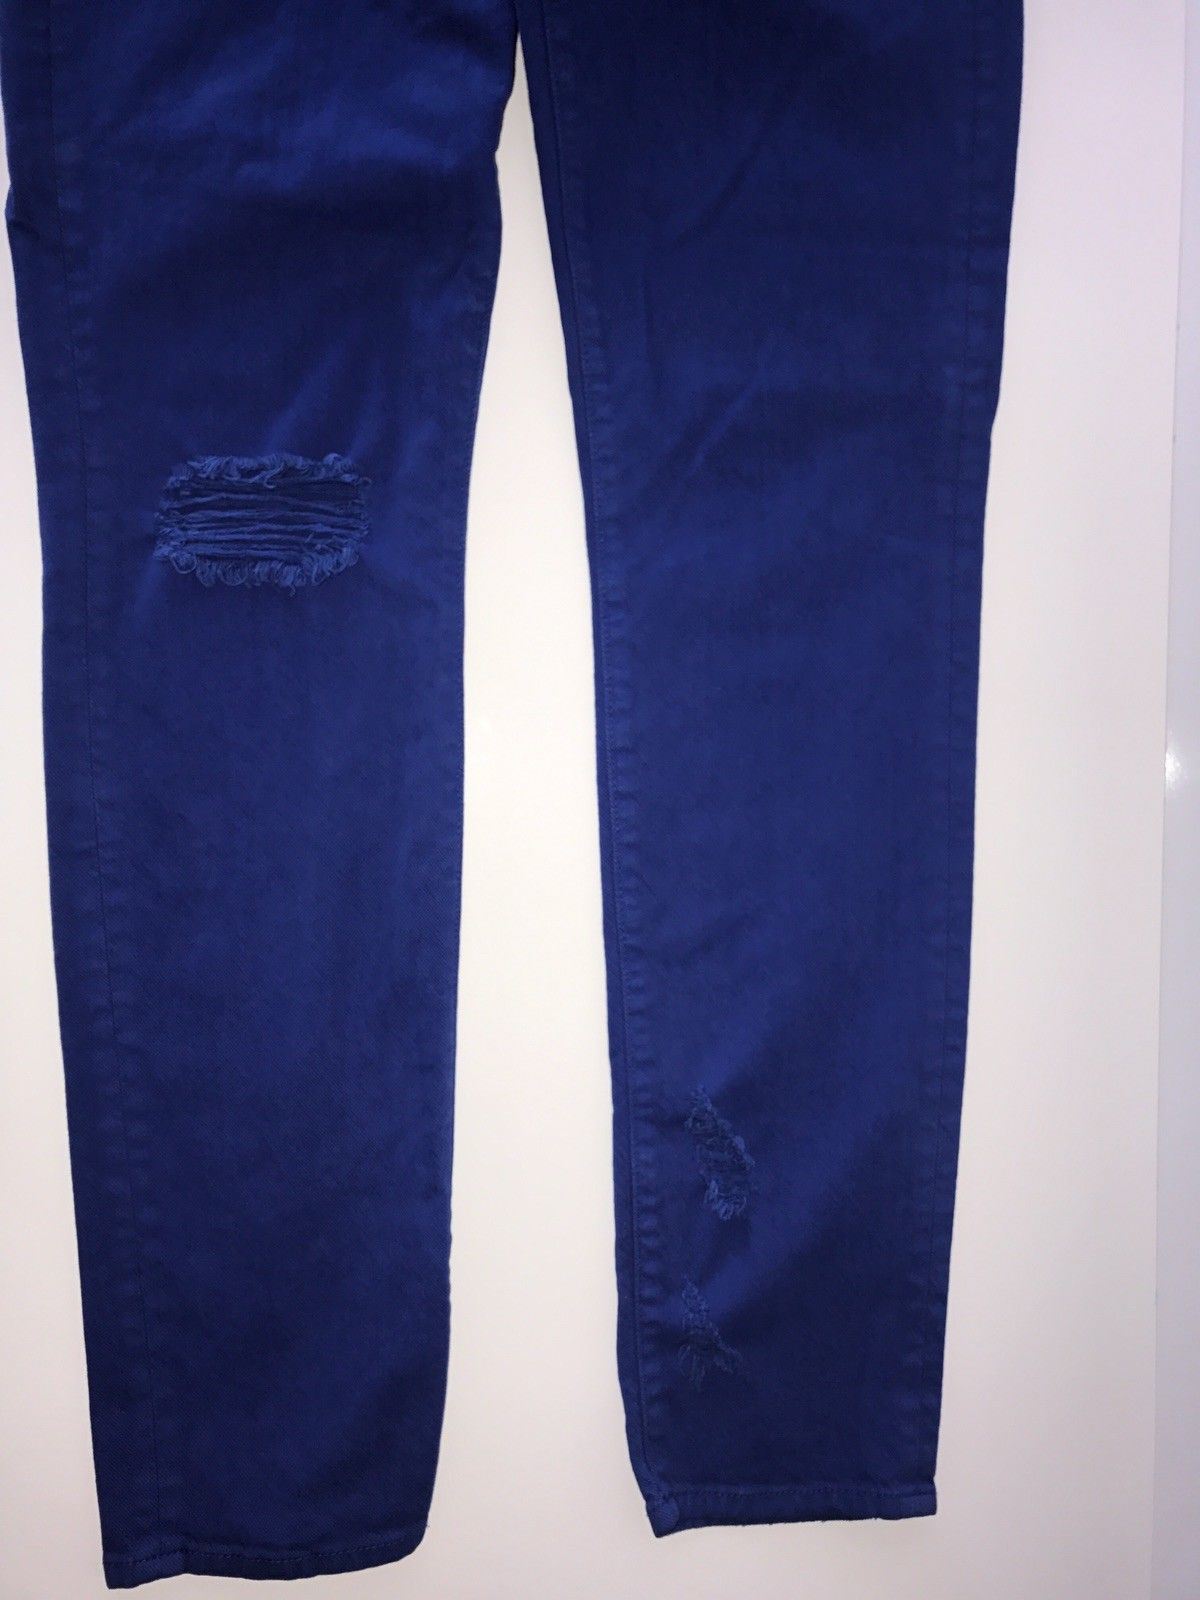 7 For All Mankind Cotton Women's Regular Fit Blue Jeans Size 26 US